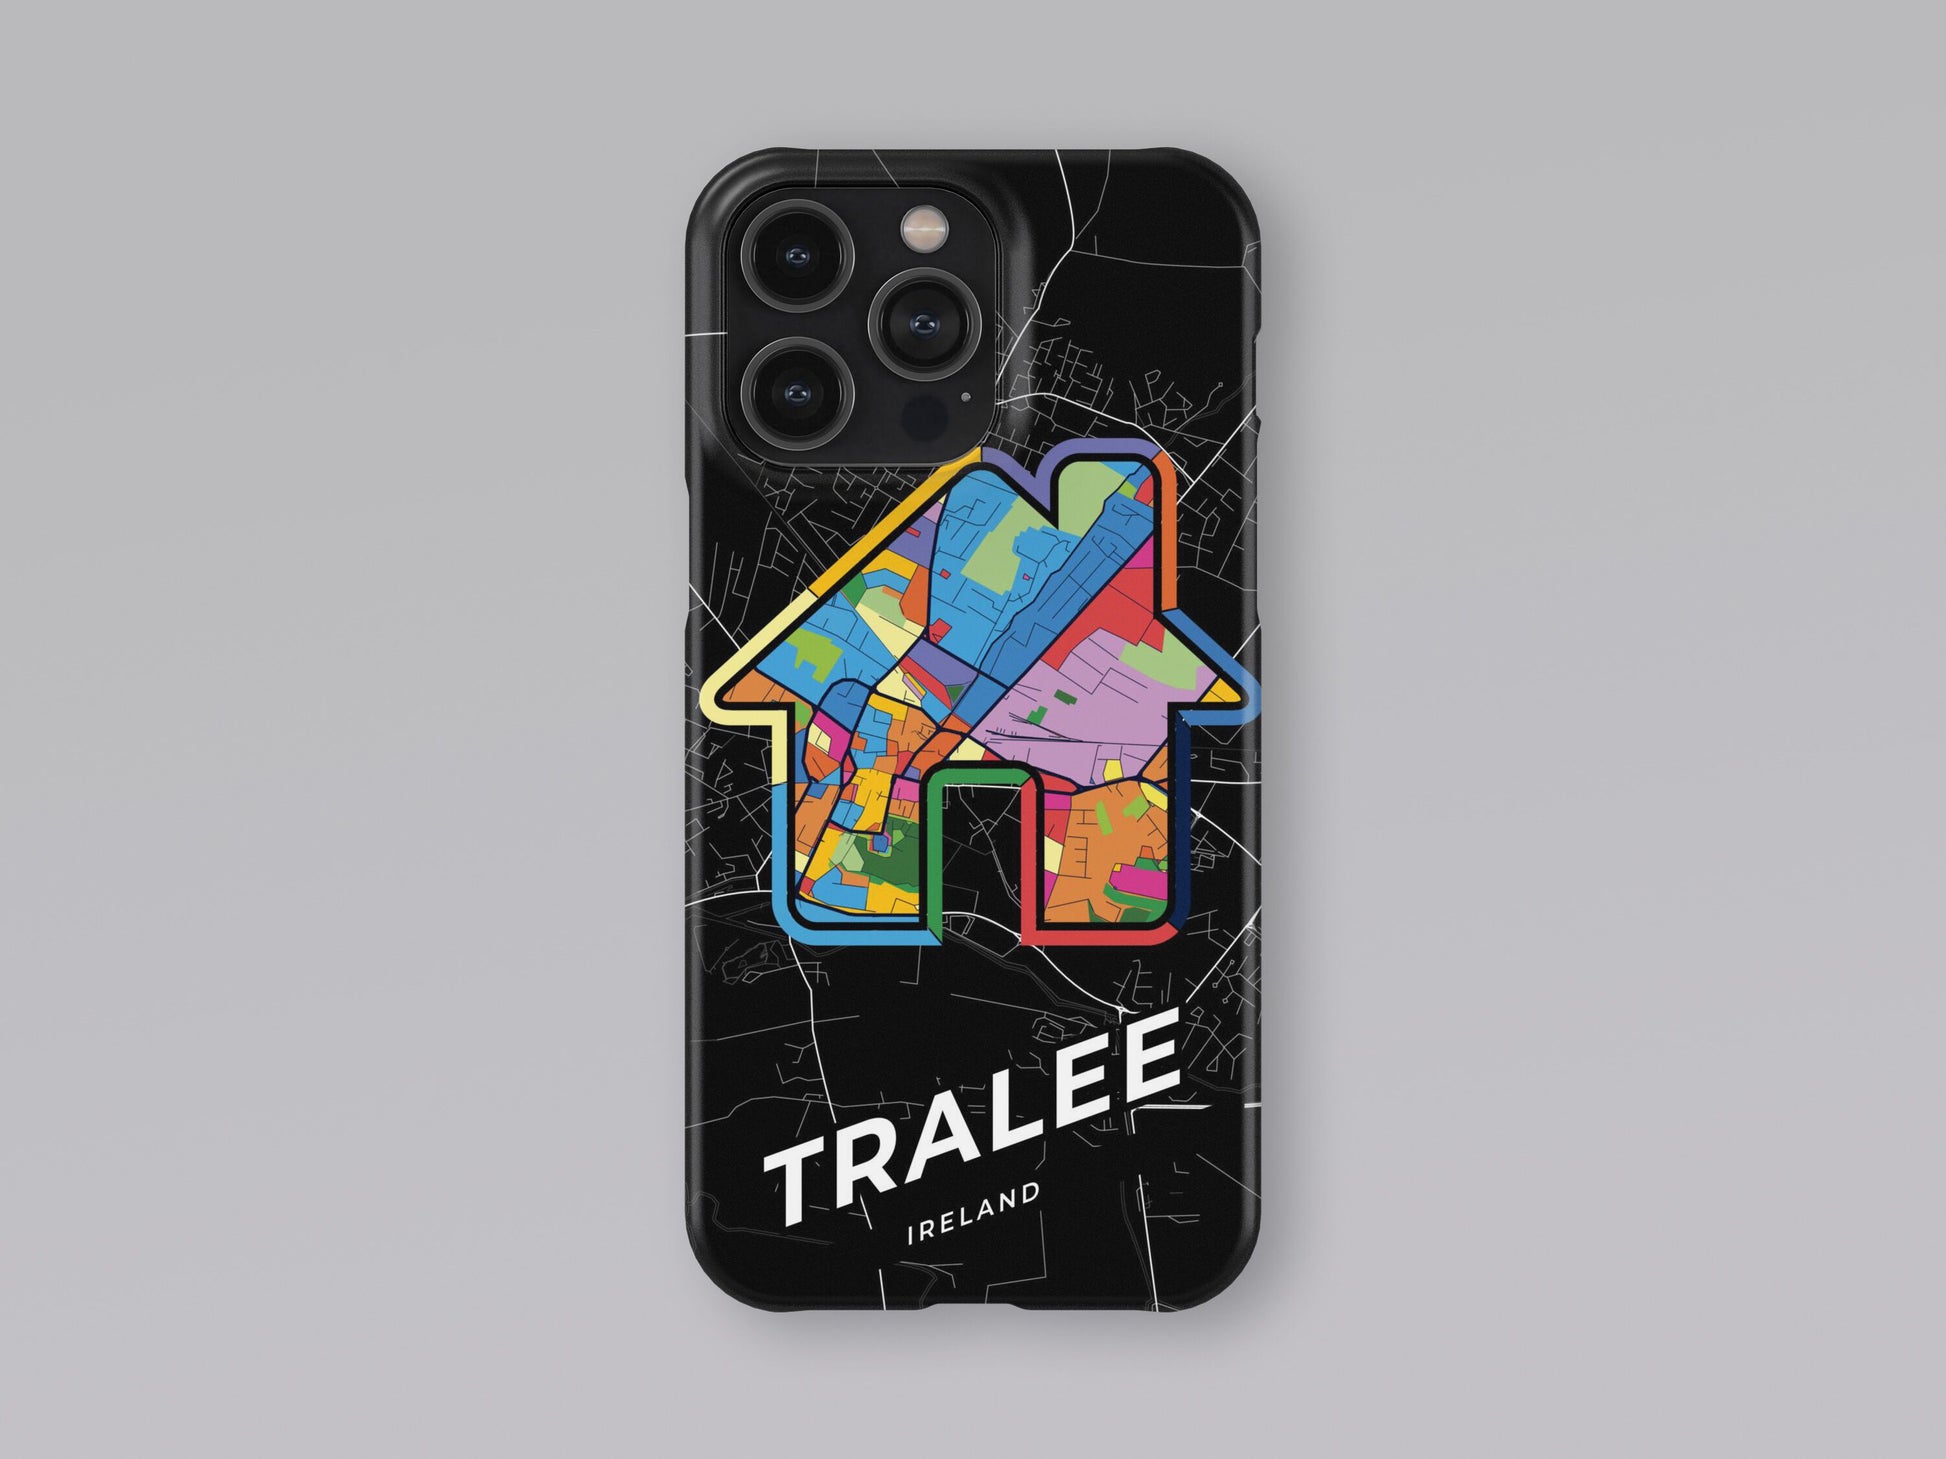 Tralee Ireland slim phone case with colorful icon 3